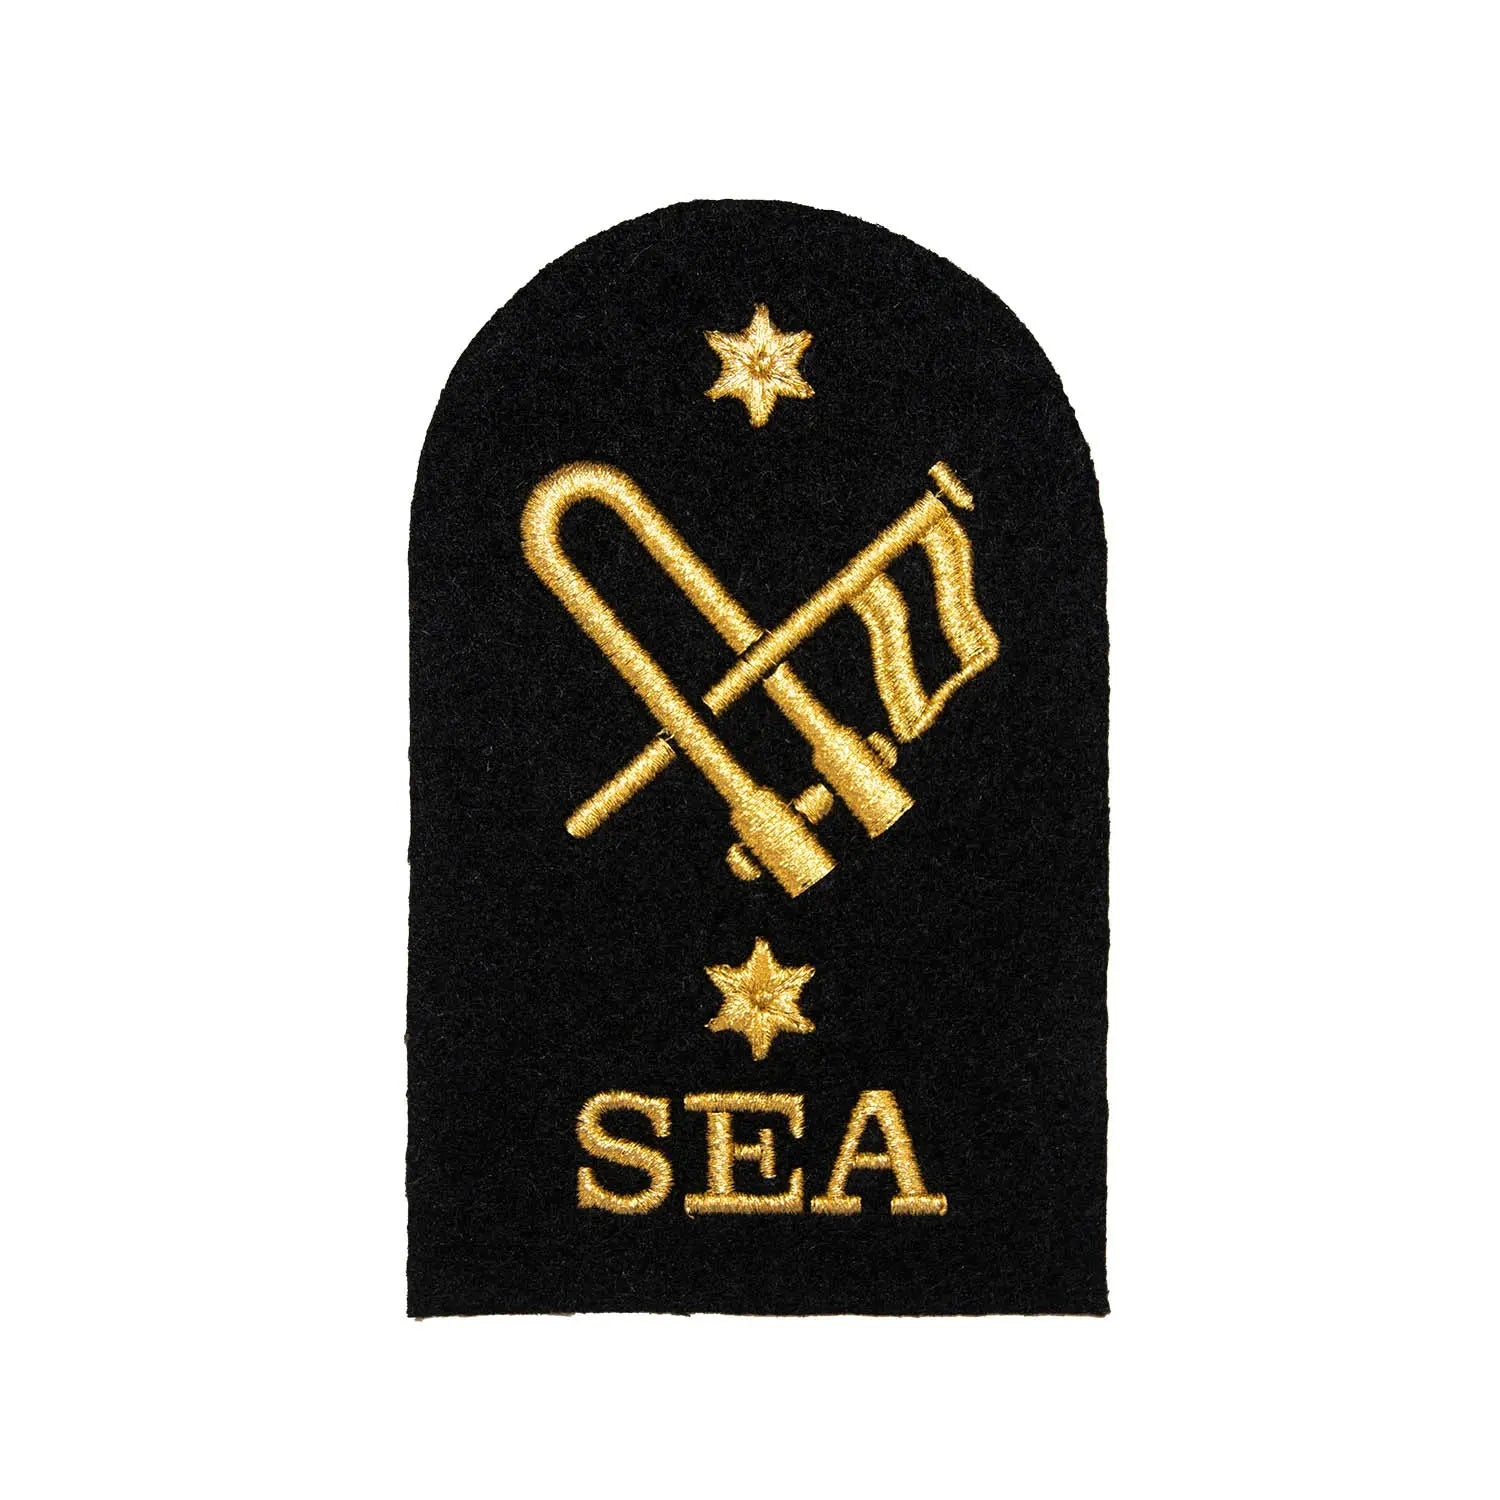 Seaman Specialist Leading Rate Royal Navy Qualification Badges wyedean